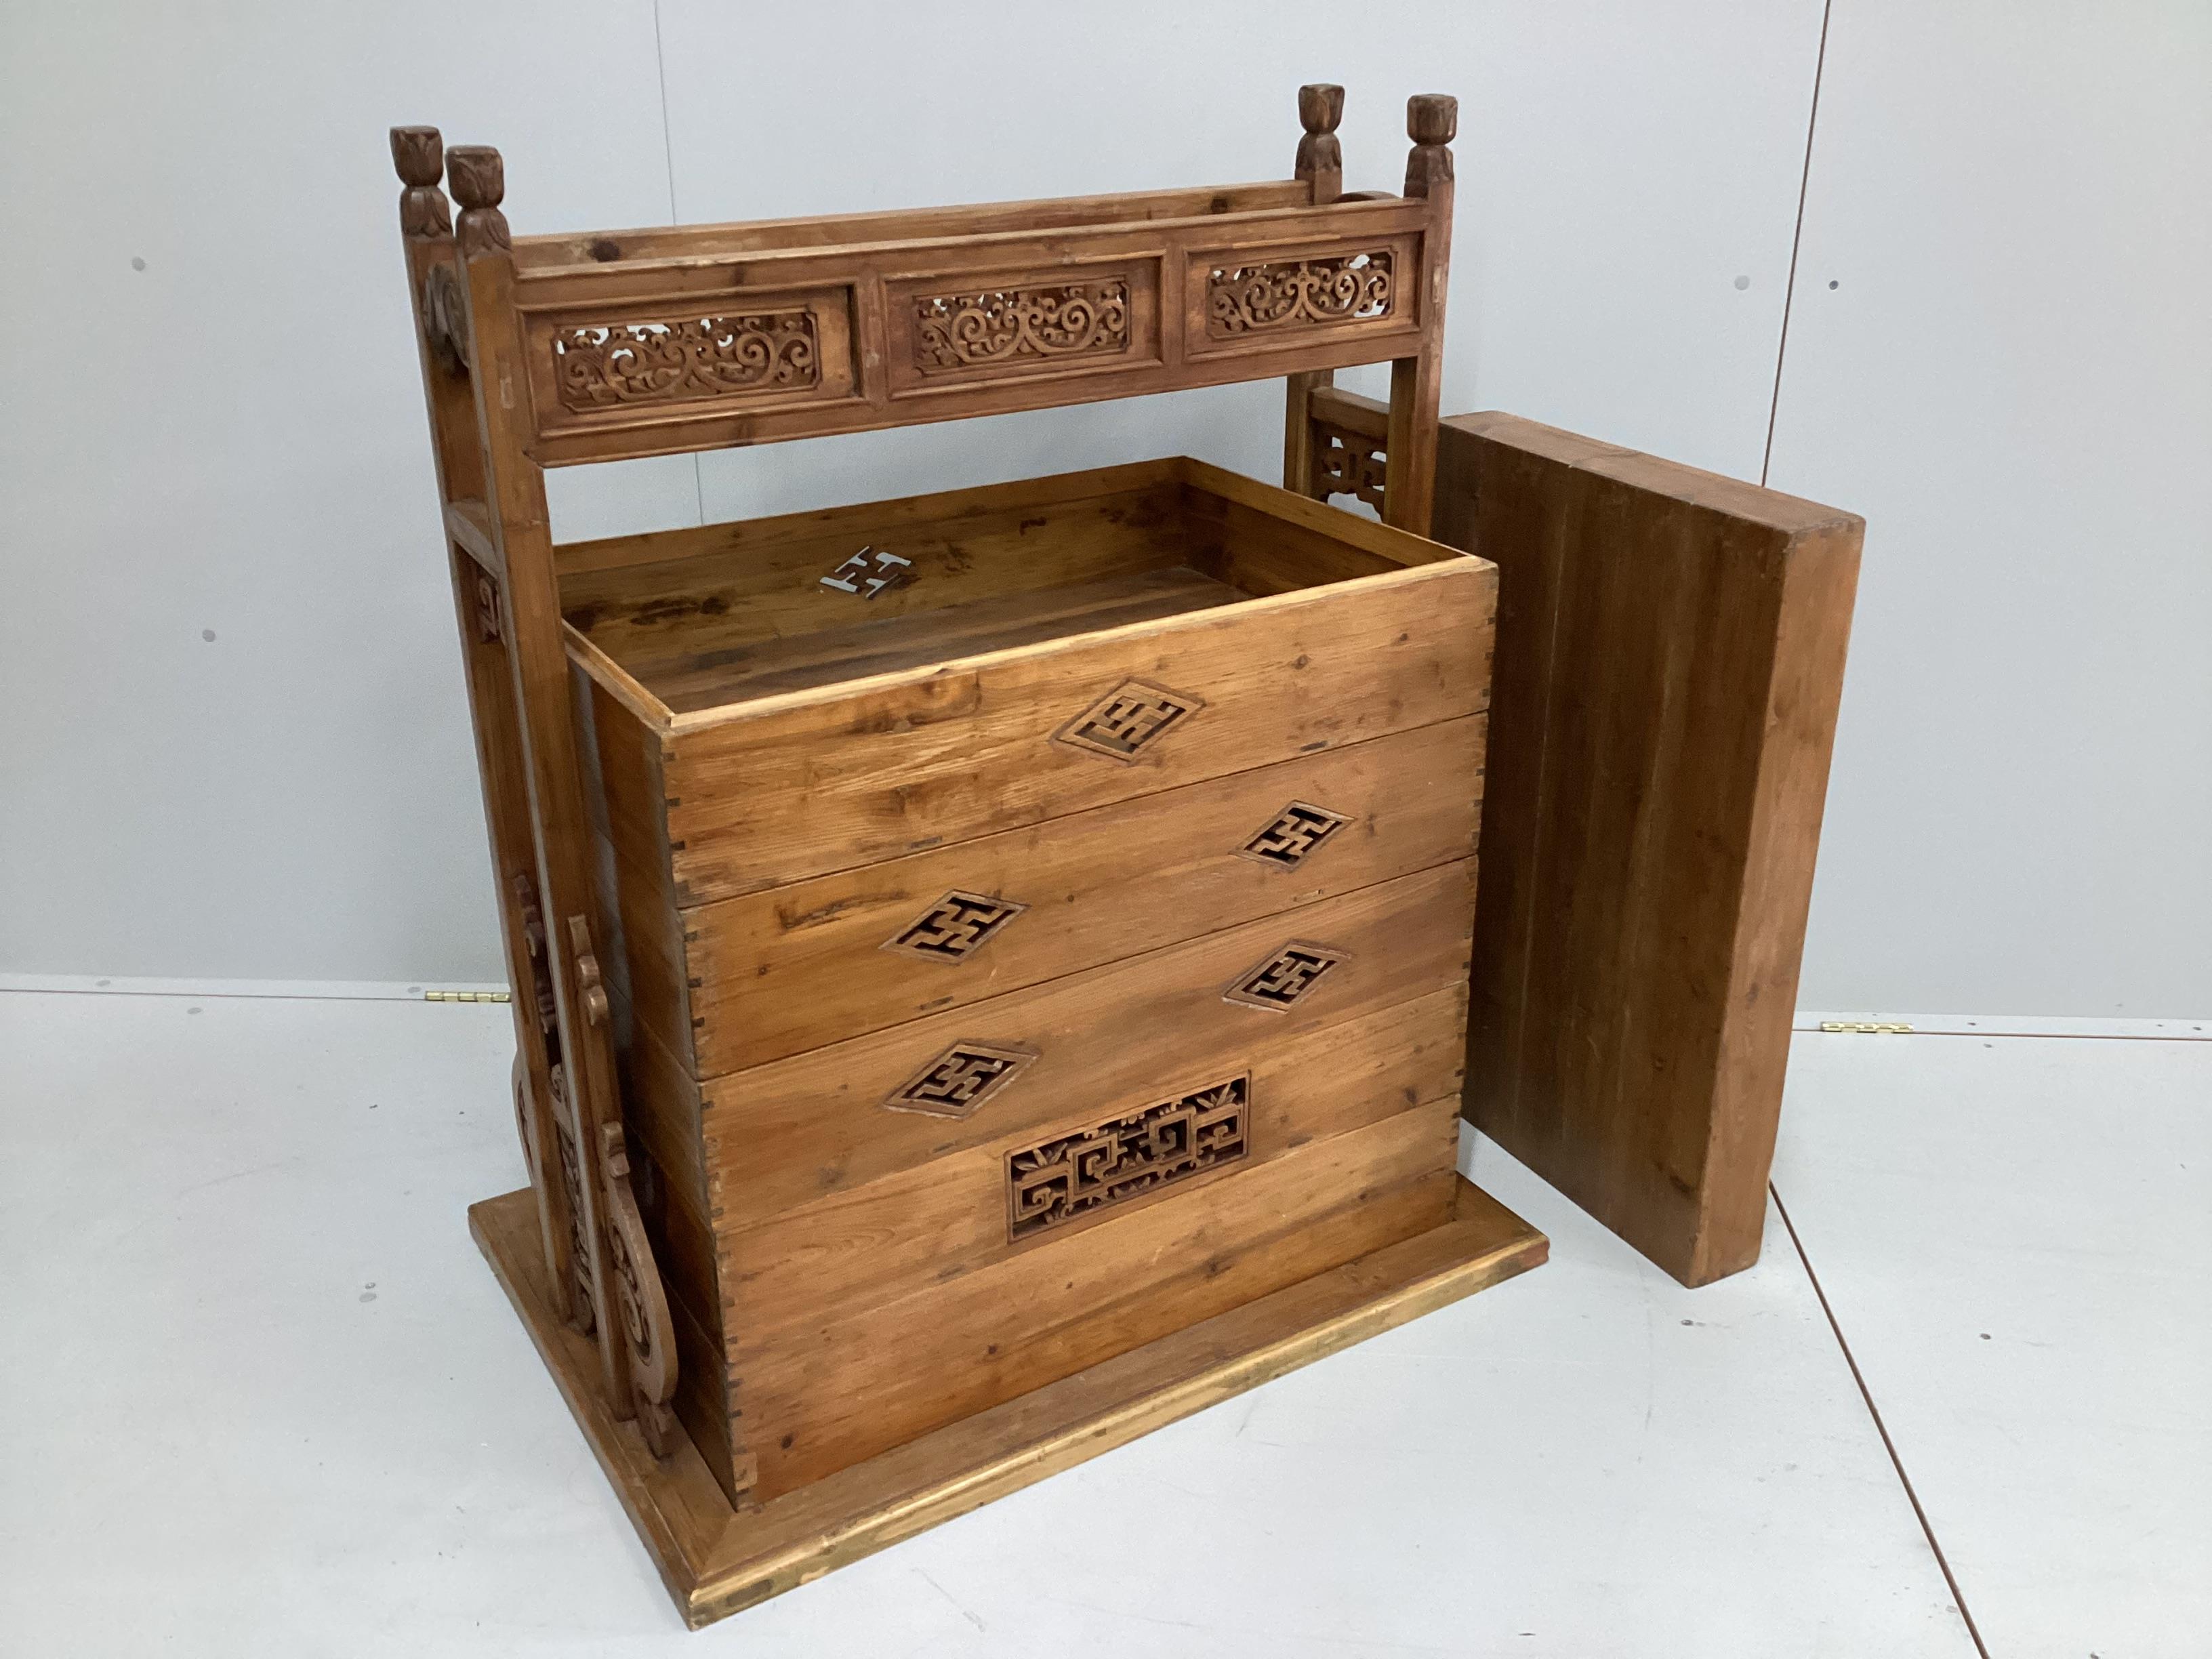 A Chinese carved pine sectional dowry chest, width 92cm, depth 50cm, height 111cm